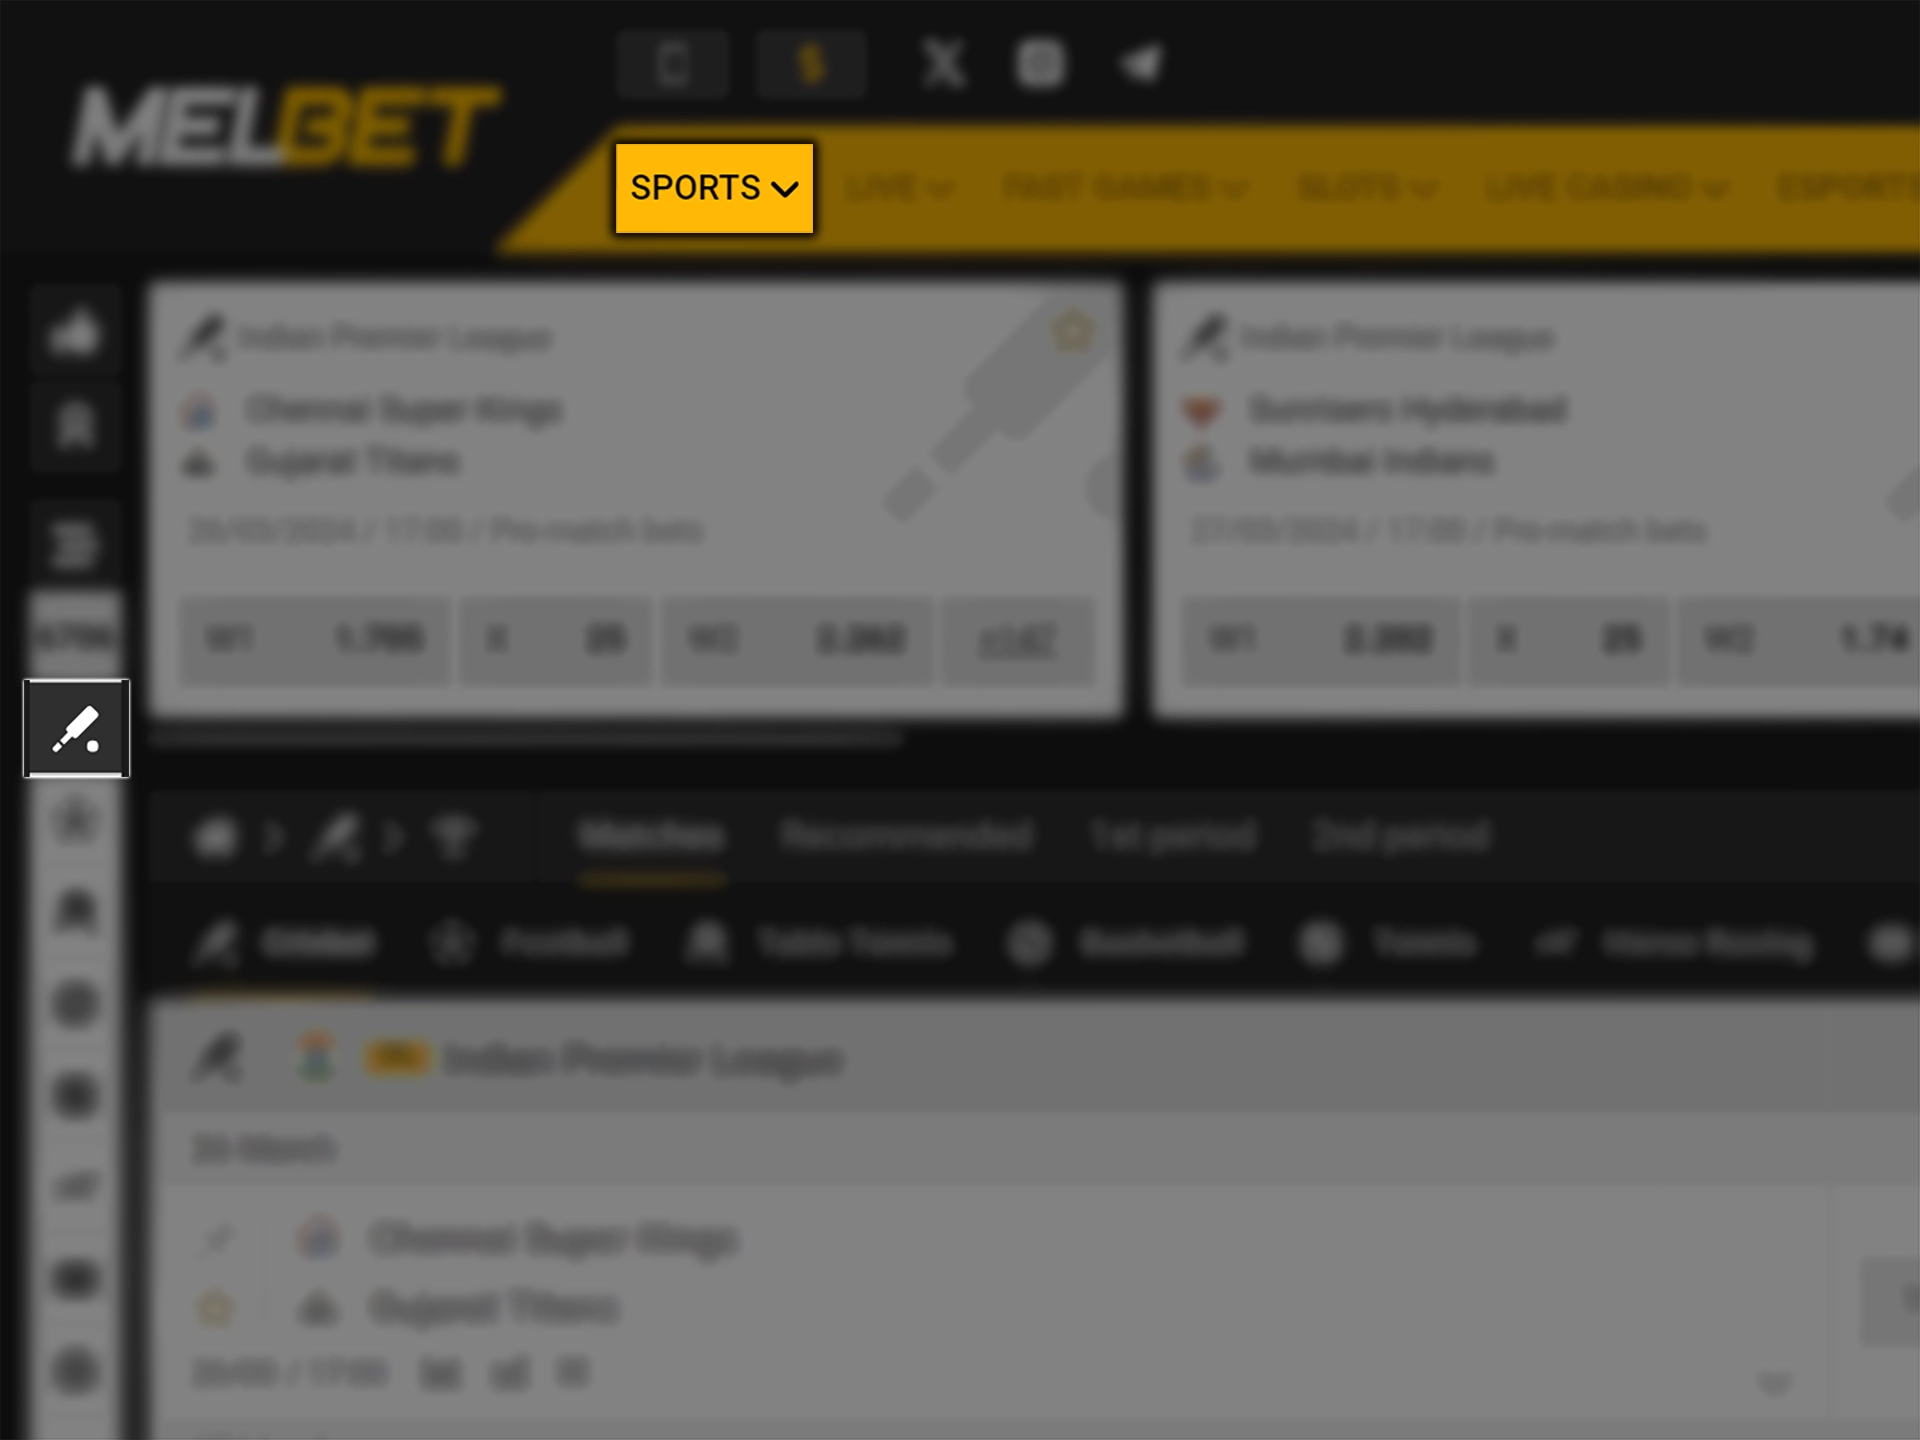 Select cricket in the Melbet sports betting section.